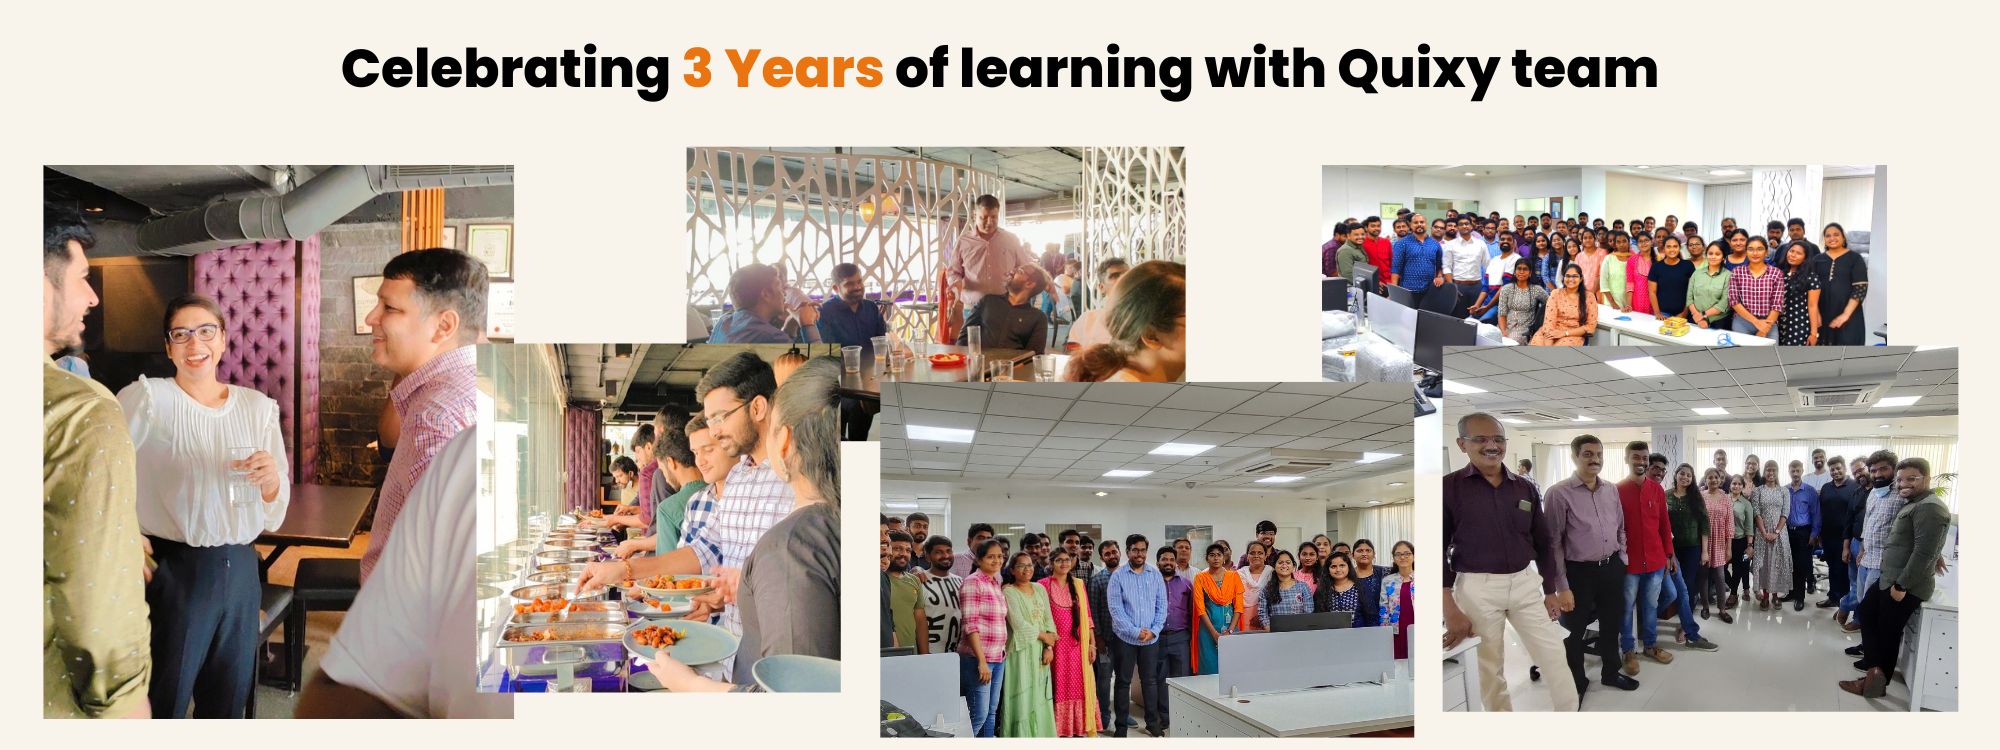 Celebrating 3 Years of learning with Quixy team